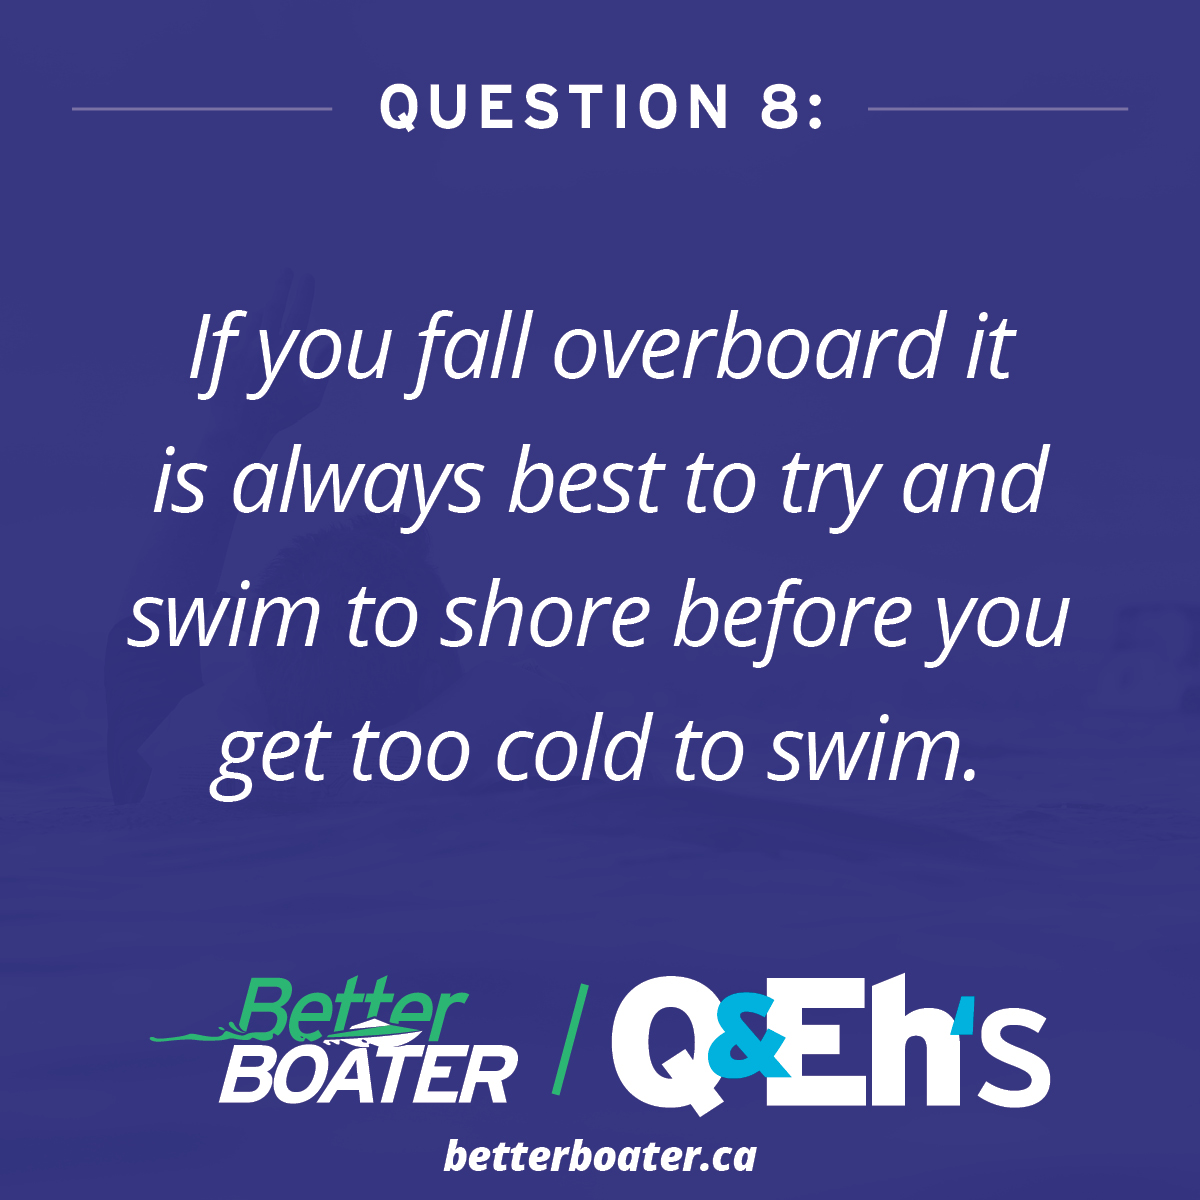 https://betterboater.ca/Fall%20Overboard